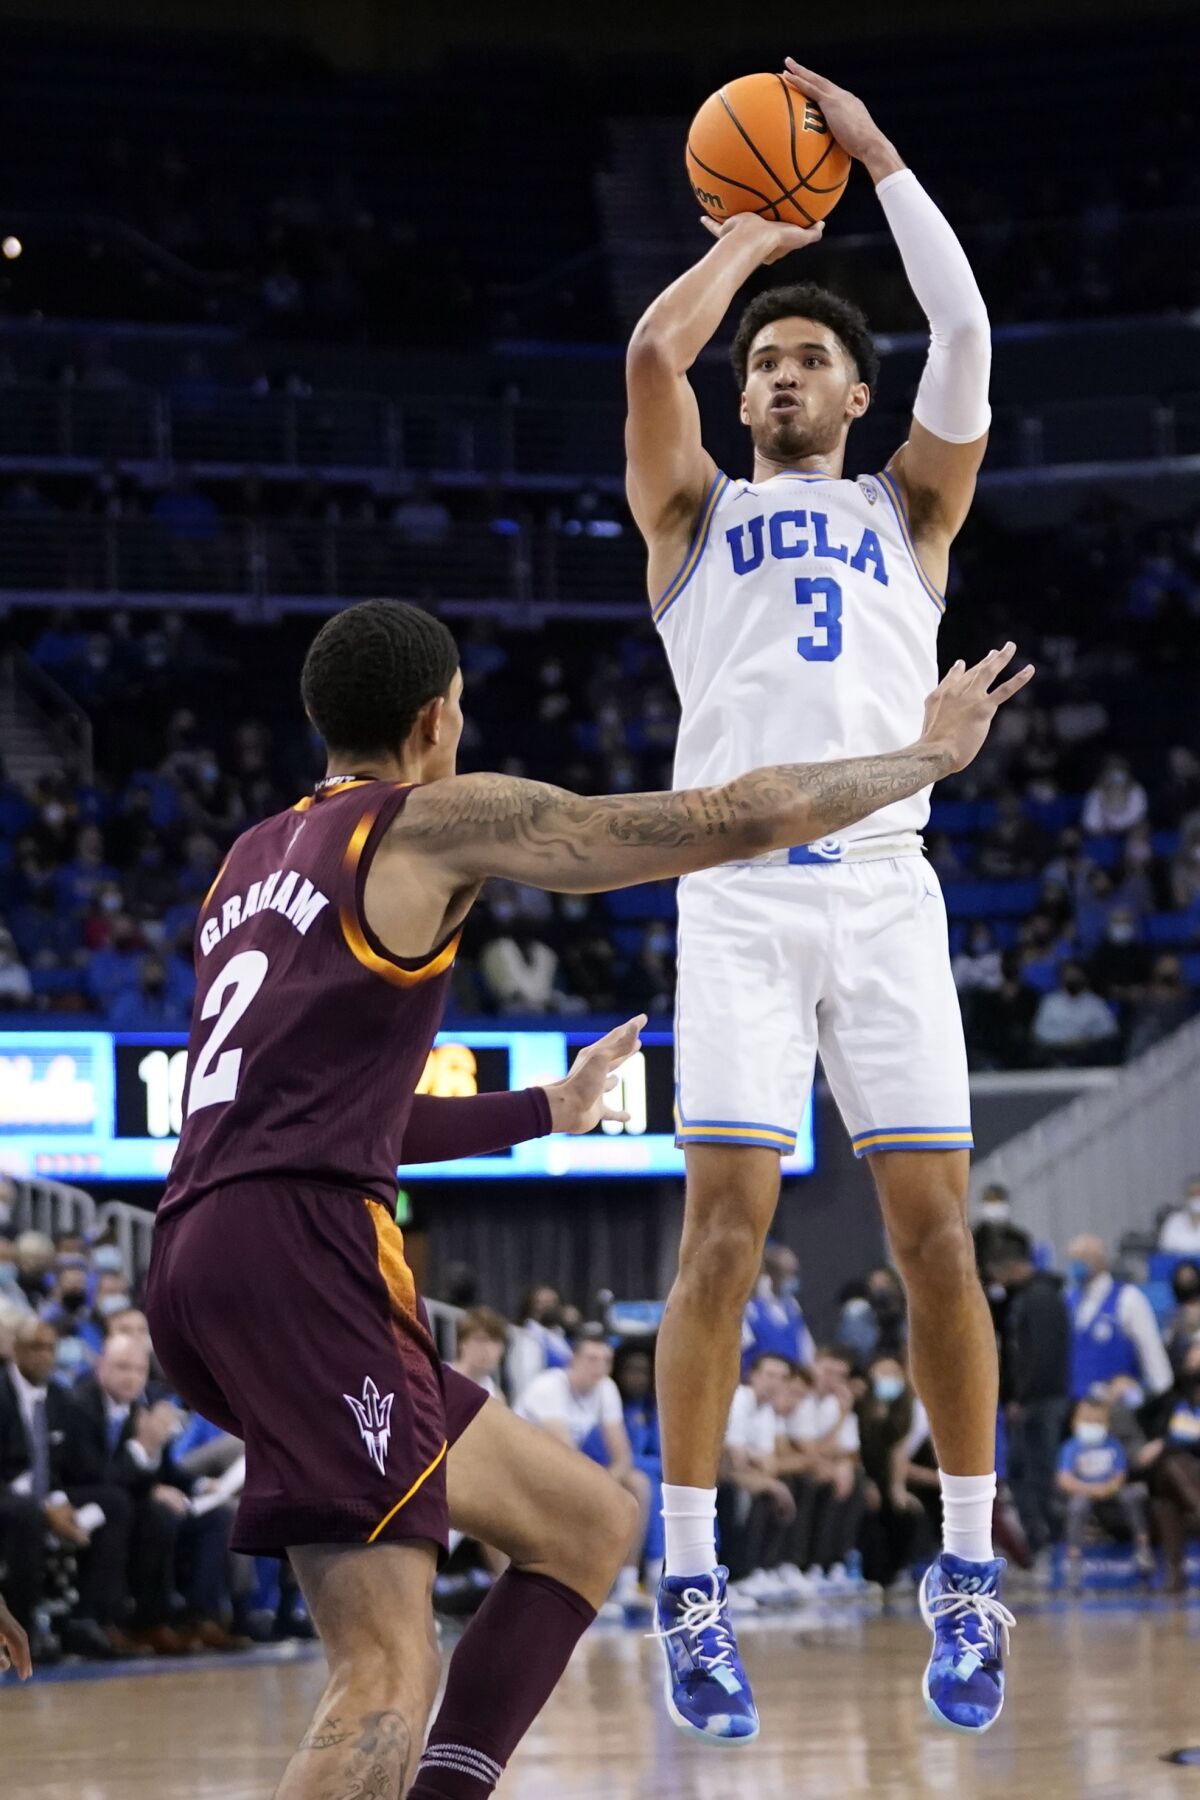 Wildcats' Mathurin earns 2nd straight Pac-12 Player of the Week honor